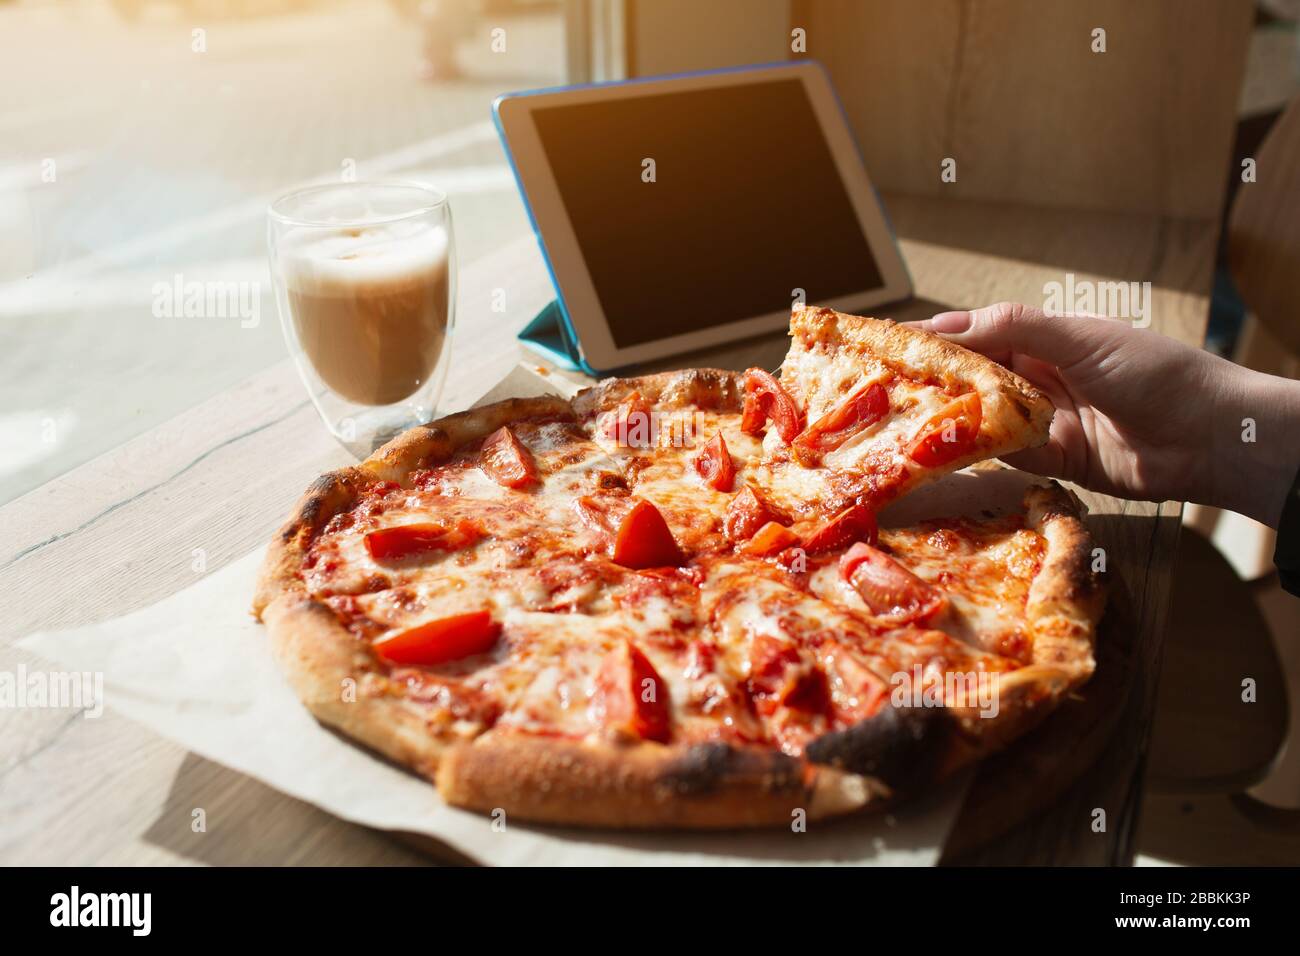 Big pizza stands on a table in a cafe. Hand taking a piece of pizza close-up. Stock Photo